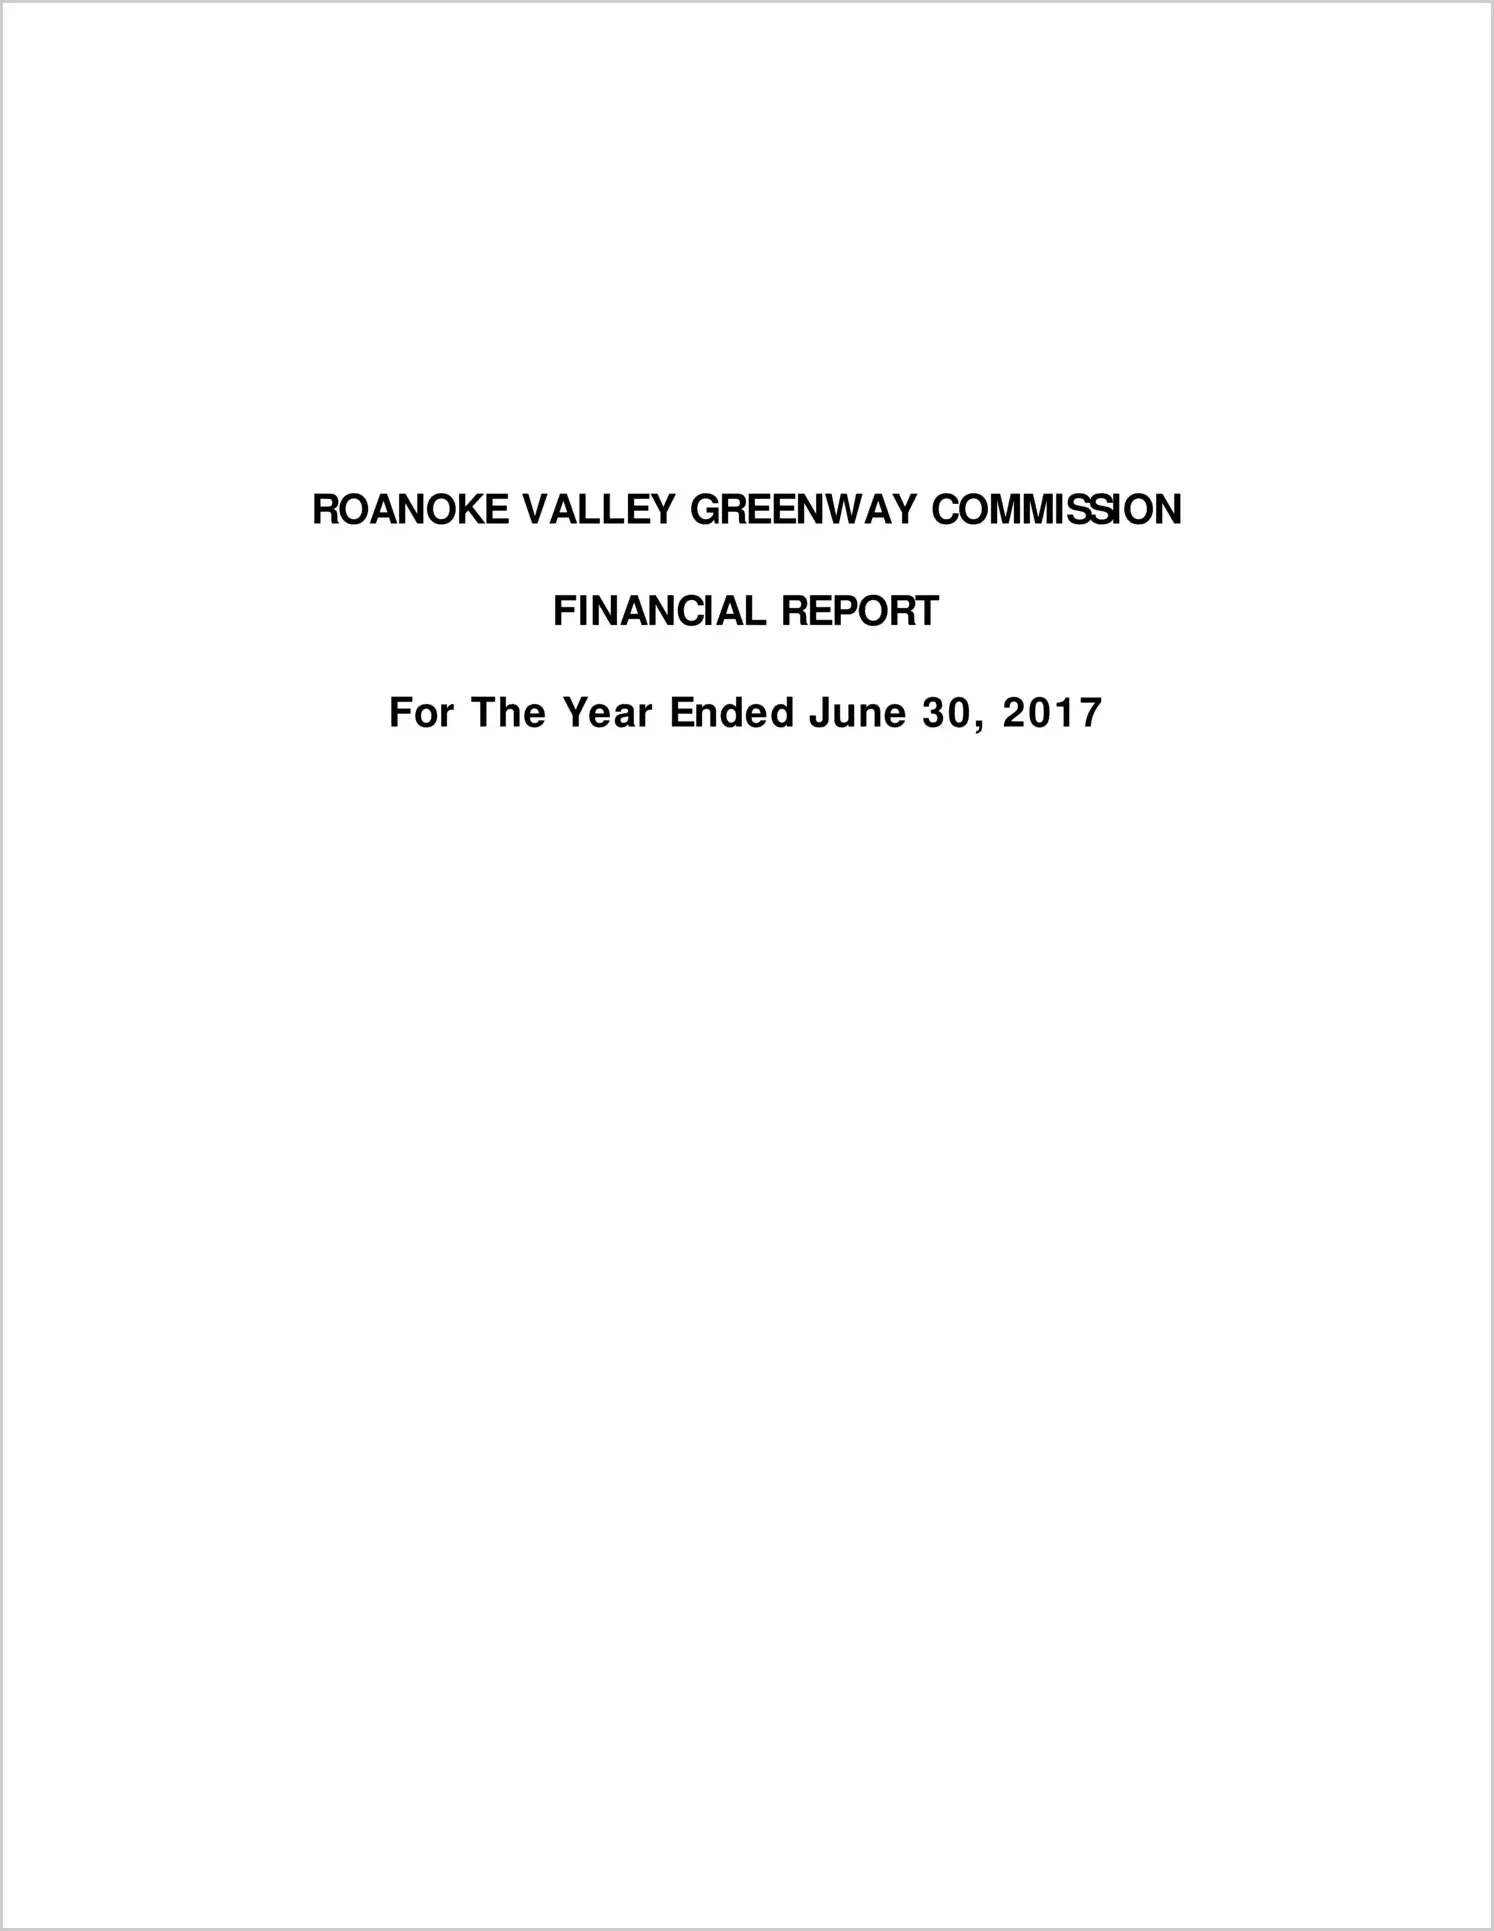 2017 ABC/Other Annual Financial Report  for Roanoke Valley Greenway Commission